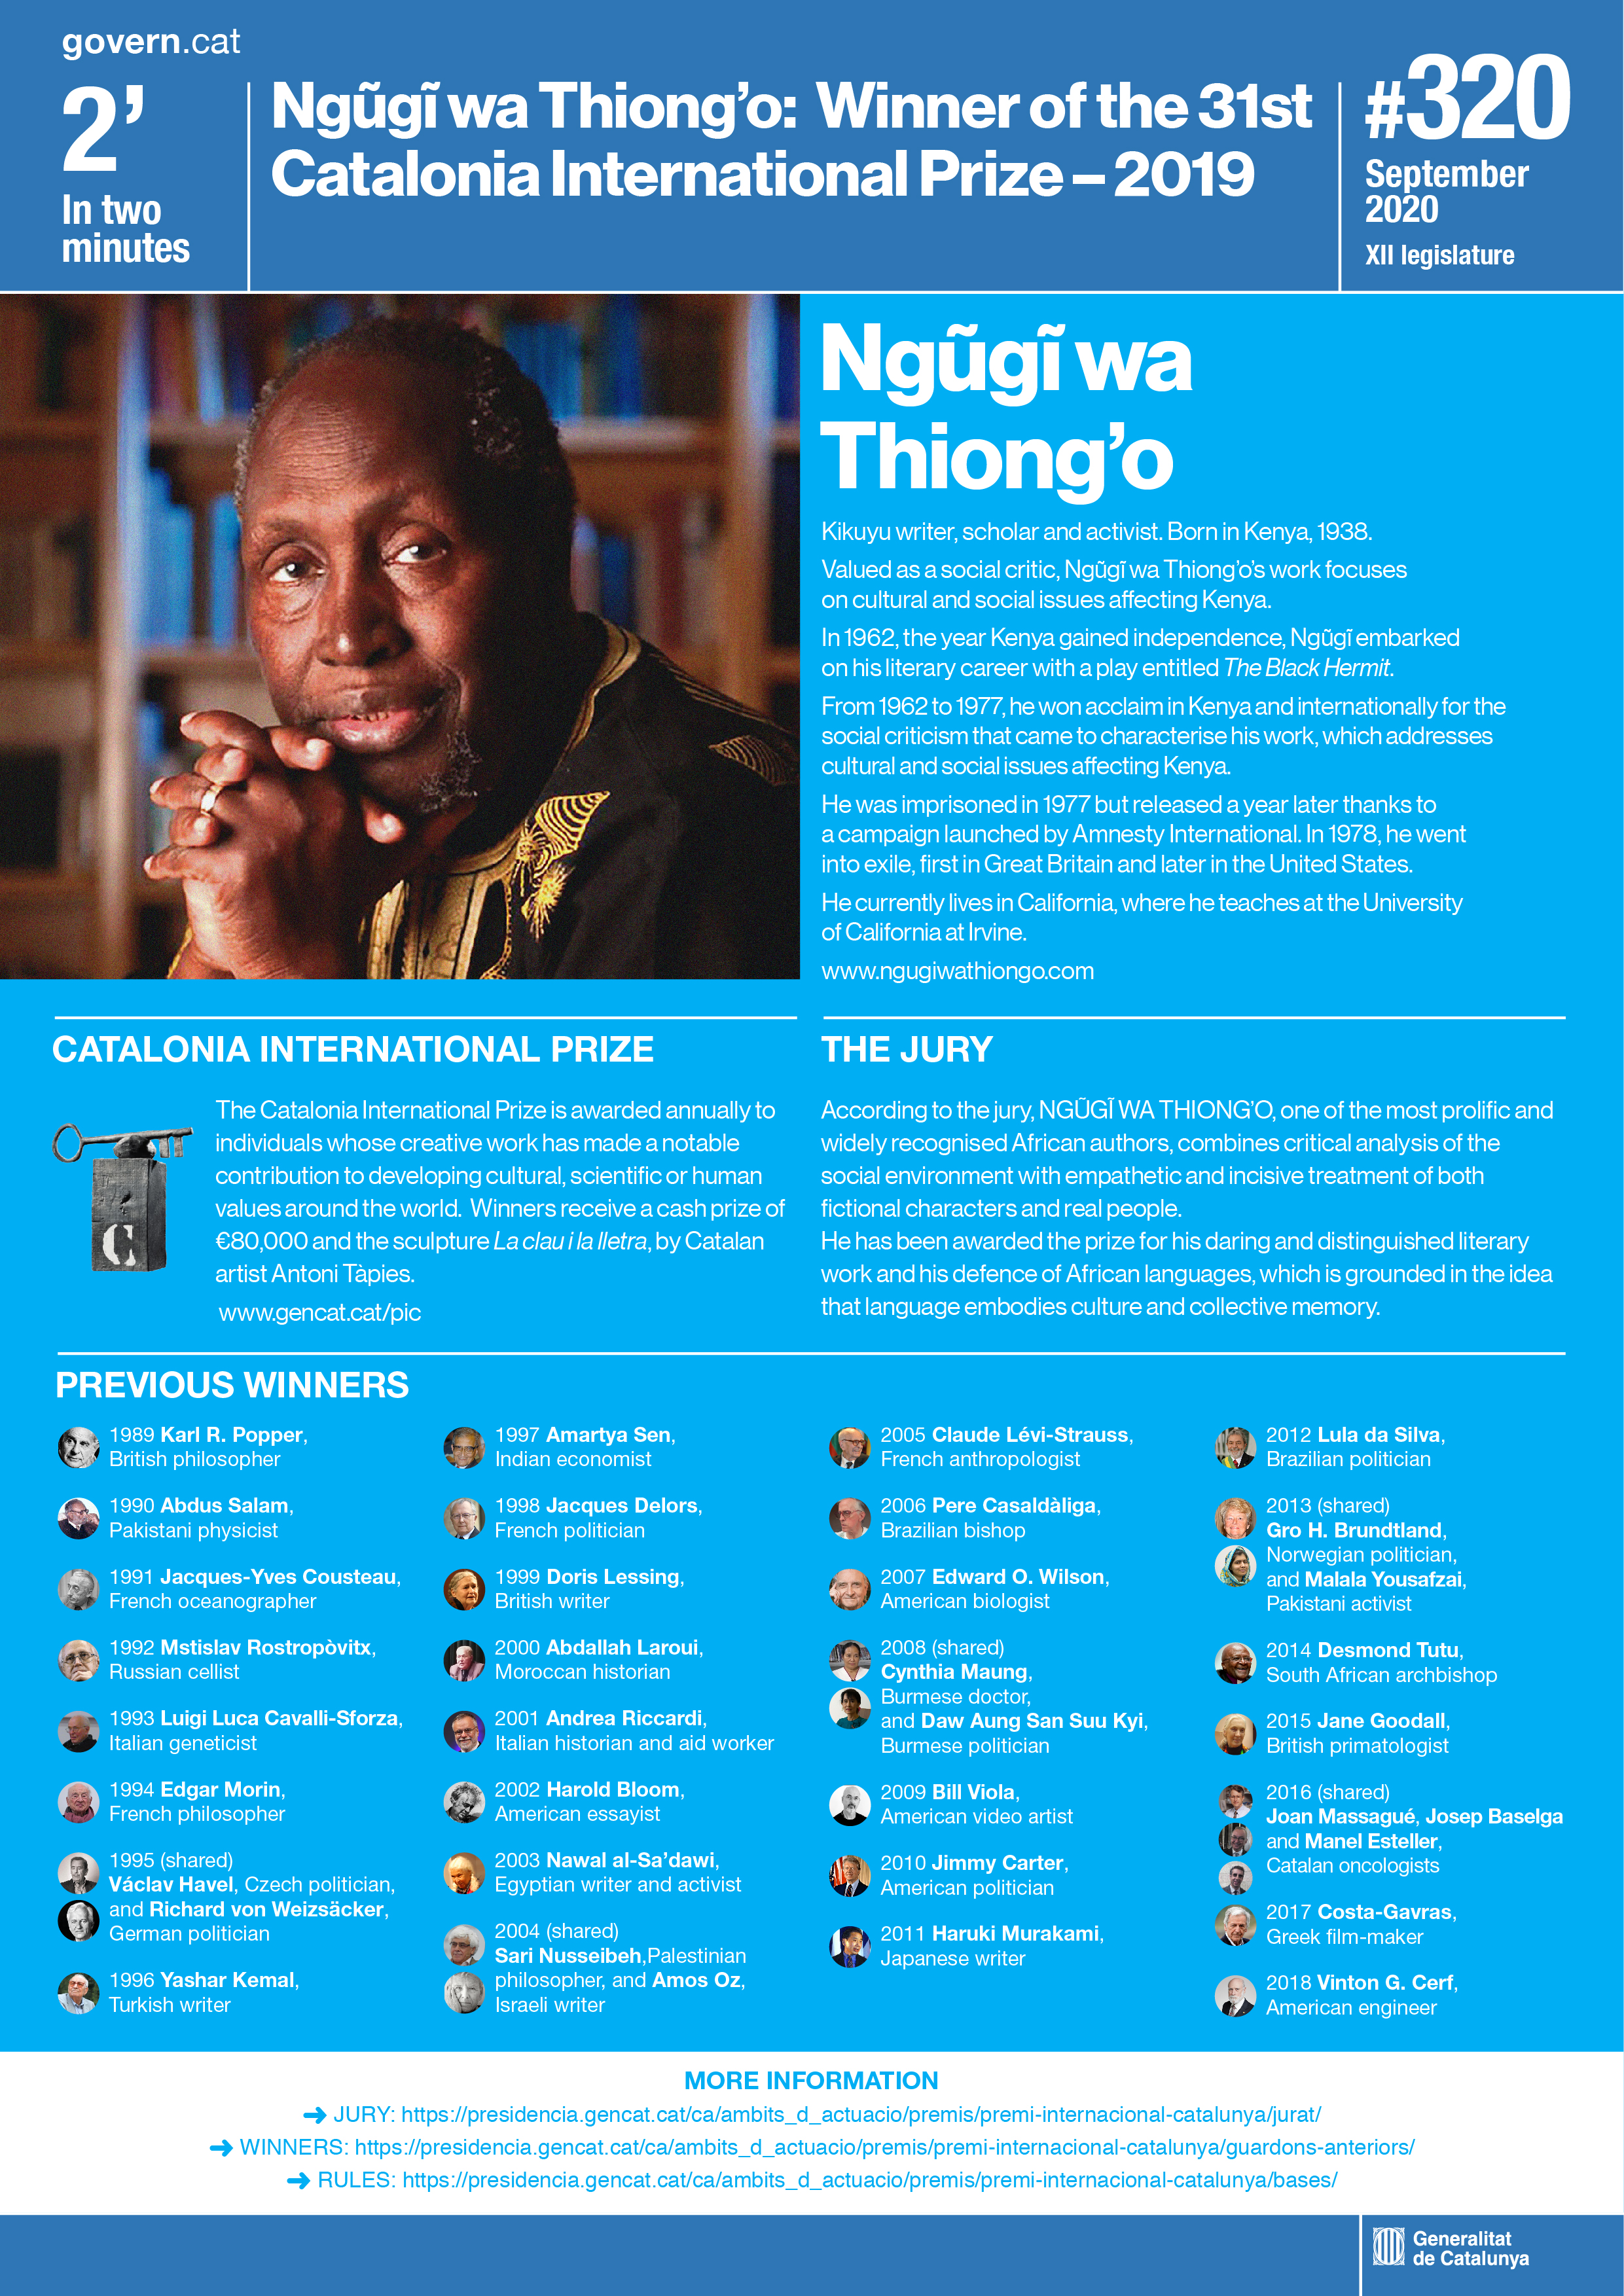 Ngugi wa Thiong'o has been awarded the prize for his daring and distinguished literary work and his defence of African languages, which is grounded in the idea that language embodies culture and collective memory.